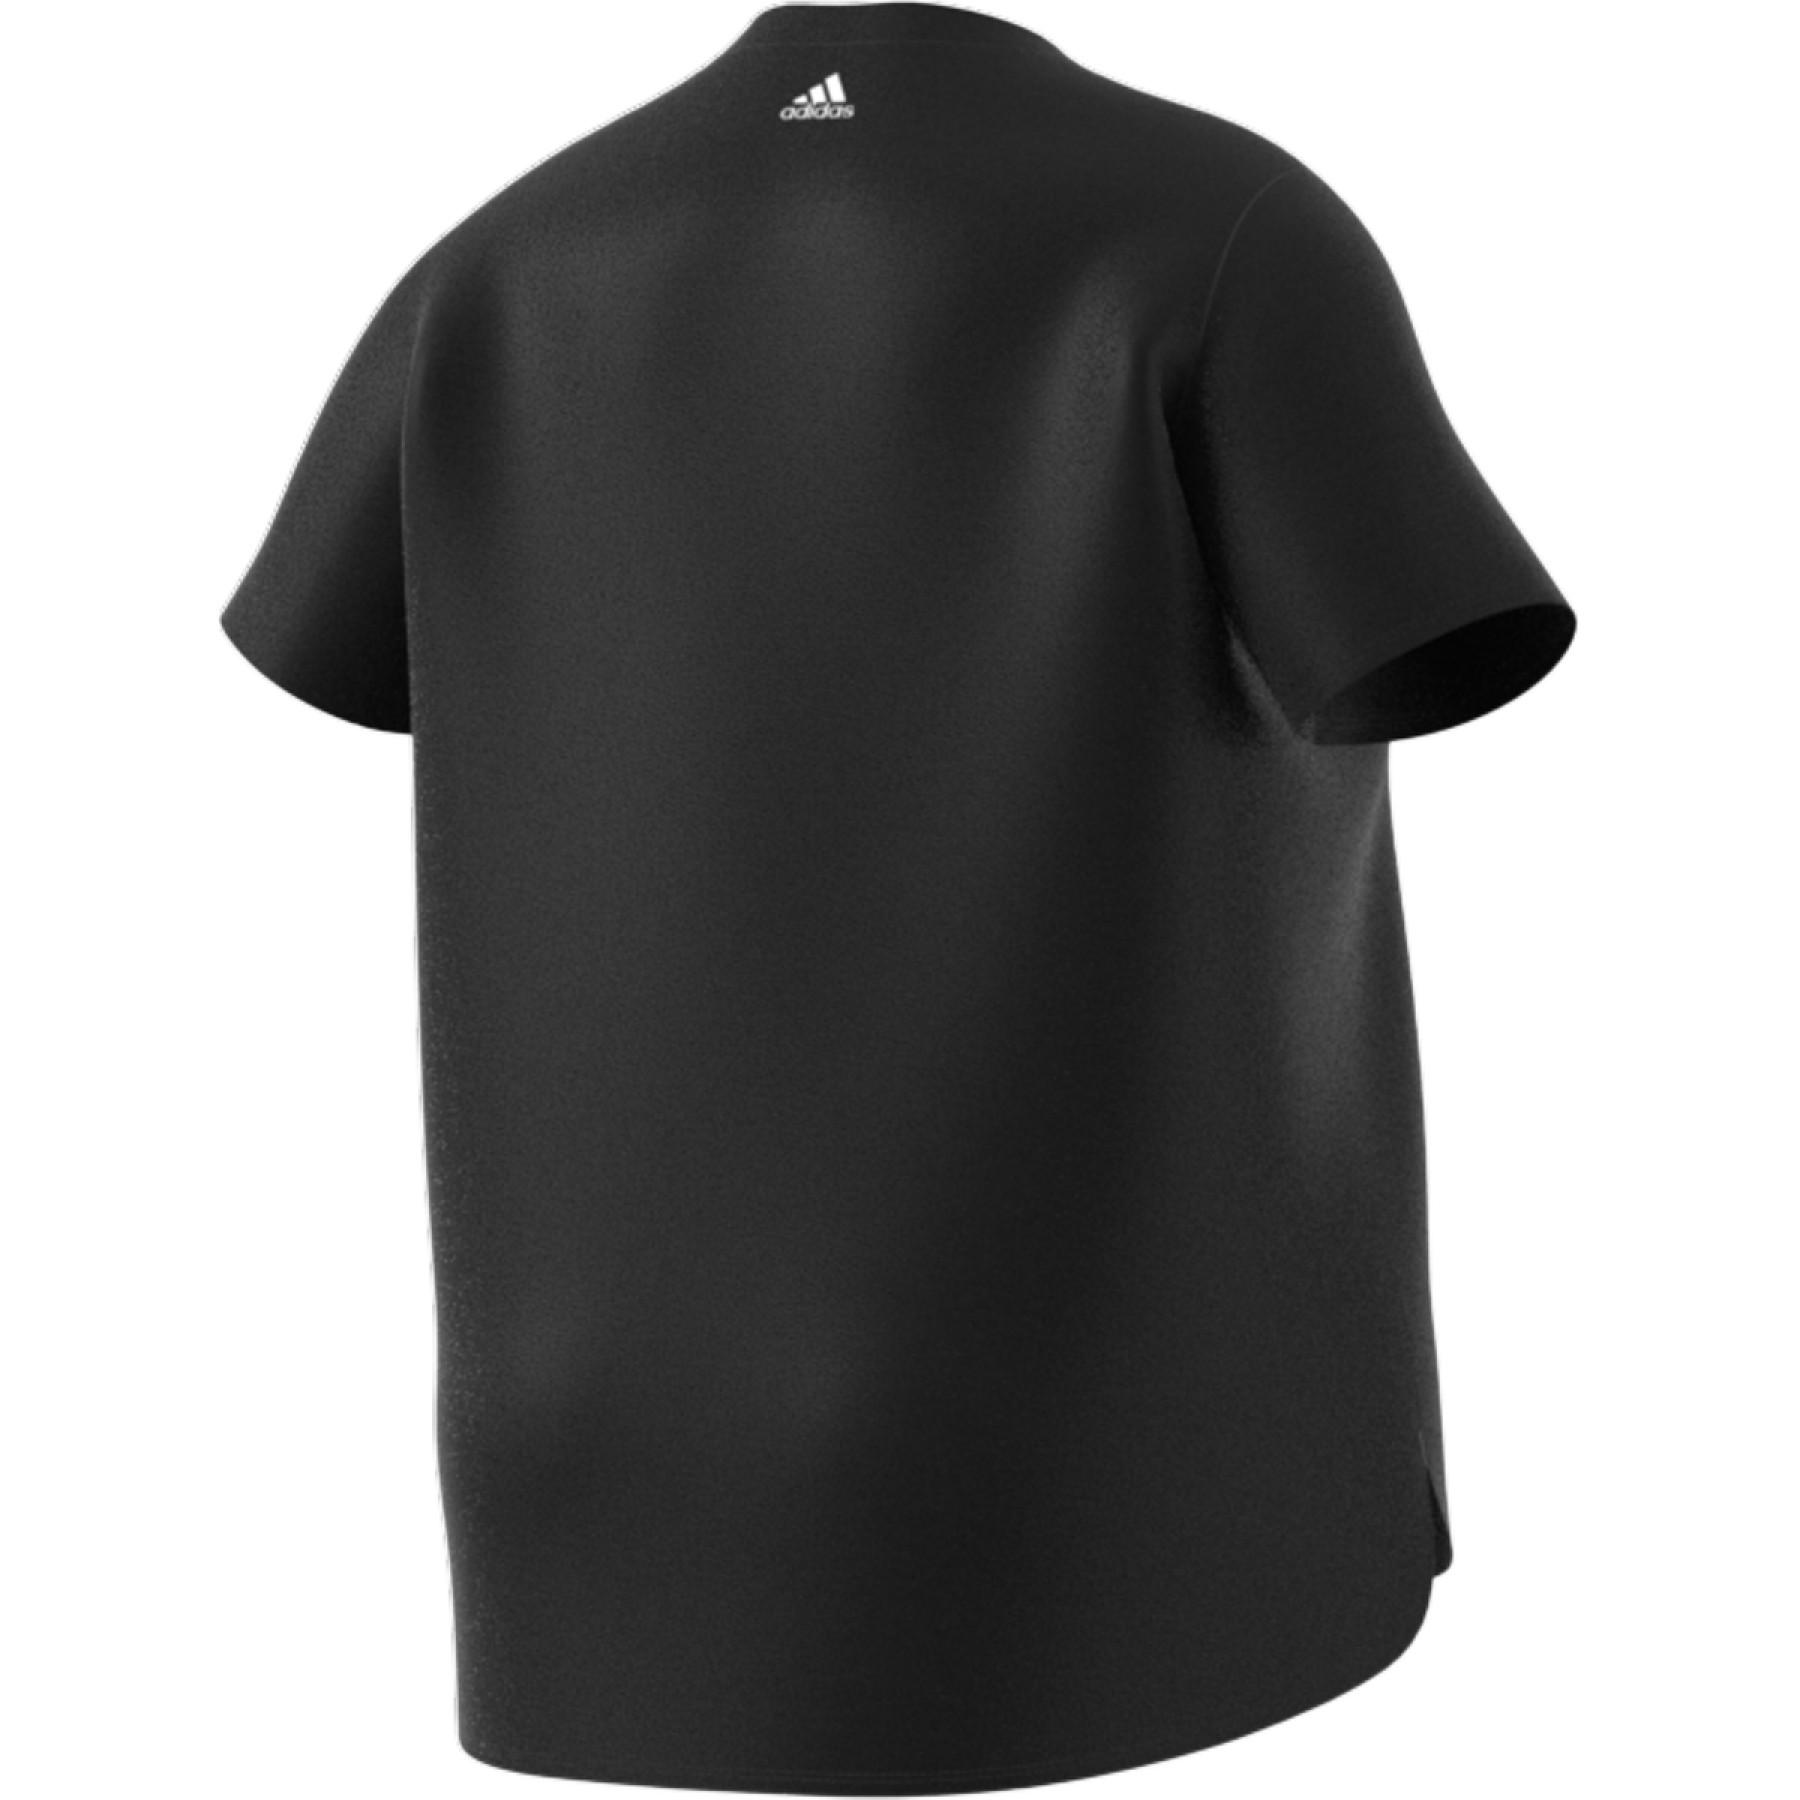 Women's T-shirt adidas Badge of Sport Grande Taille